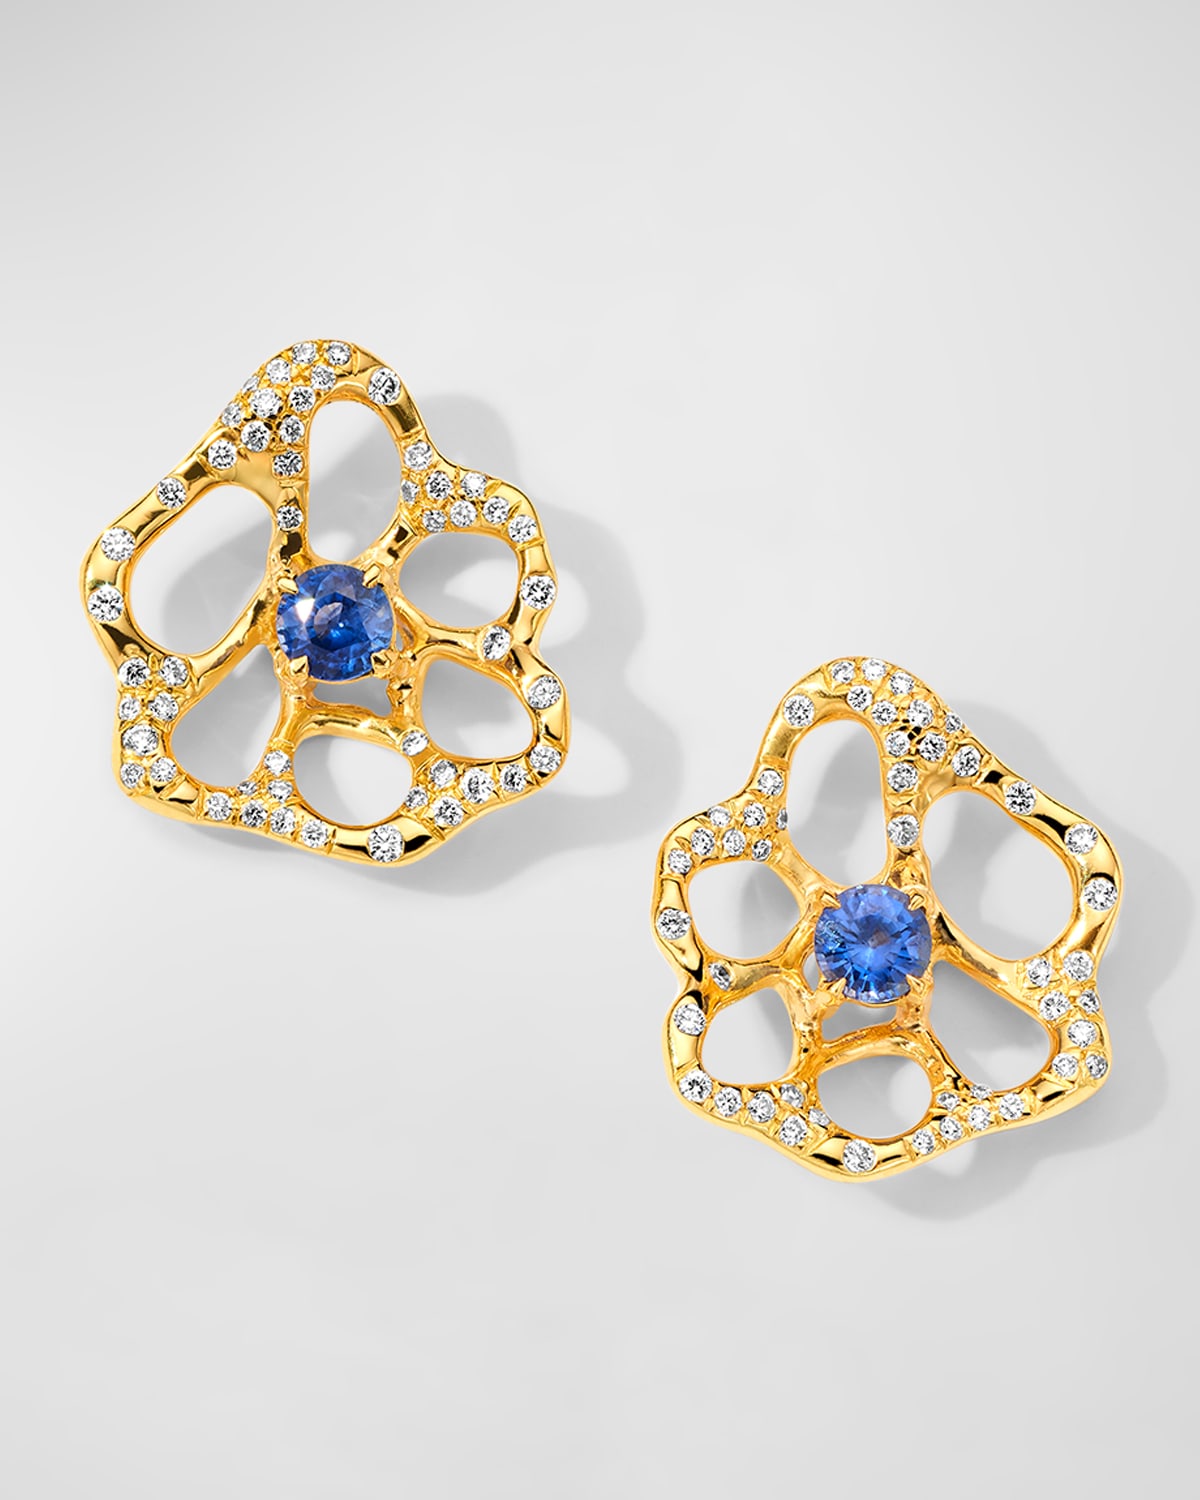 IPPOLITA 18K STARDUST DRIZZLE SMALL FLOWER STUD EARRINGS WITH BLUE SAPPHIRE AND DIAMONDS